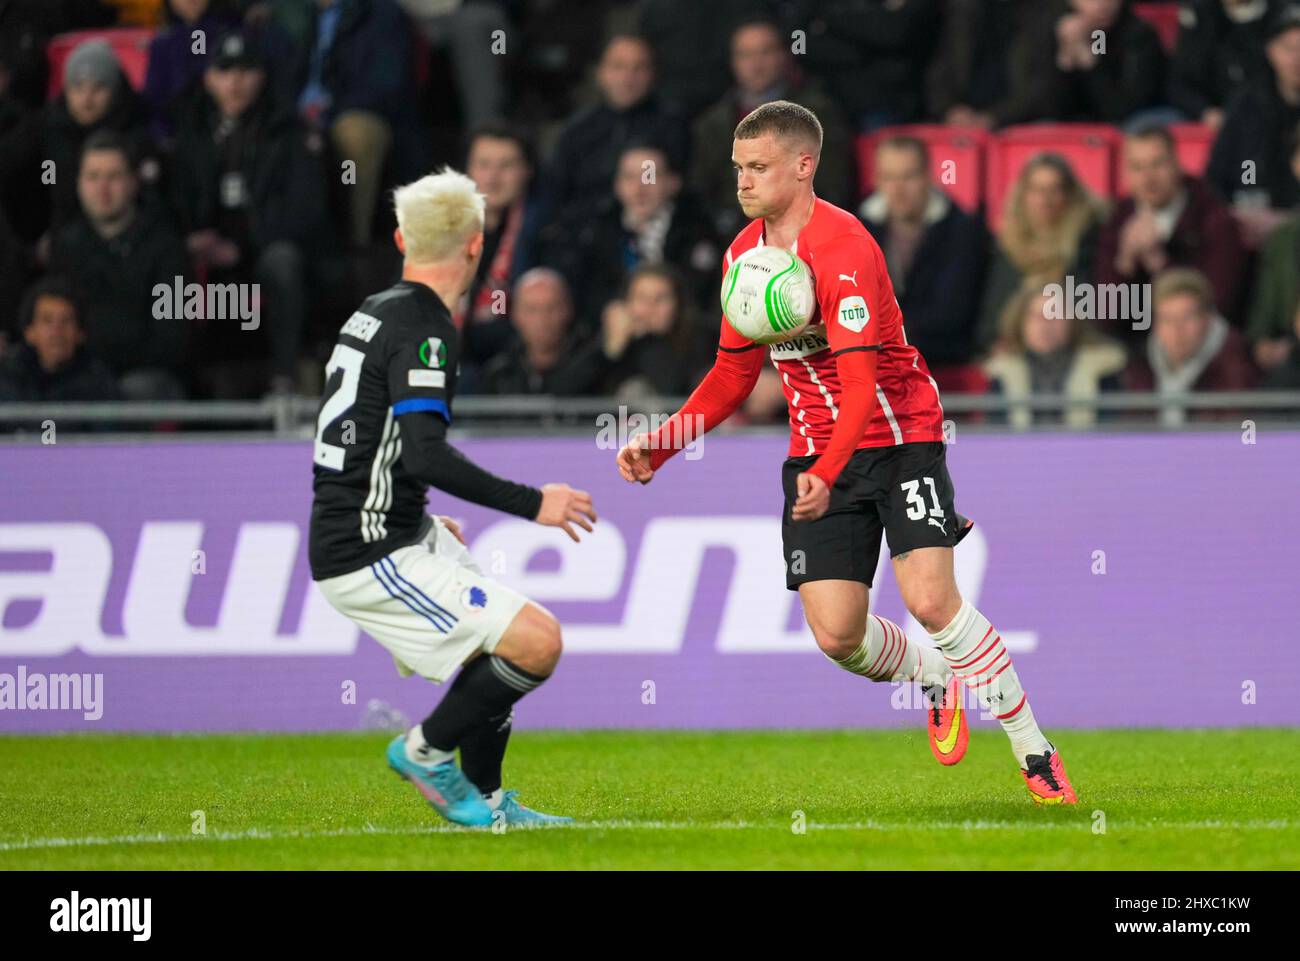 Philips Stadium, Eindhoven, Netherlands. 10th Mar, 2022. Philipp Max of PSV Eindhoven controls the ball during PSV Eindhoven v FC KÃ¸benhavn, at Philips Stadium, Eindhoven, Netherlands. Kim Price/CSM/Alamy Live News Stock Photo